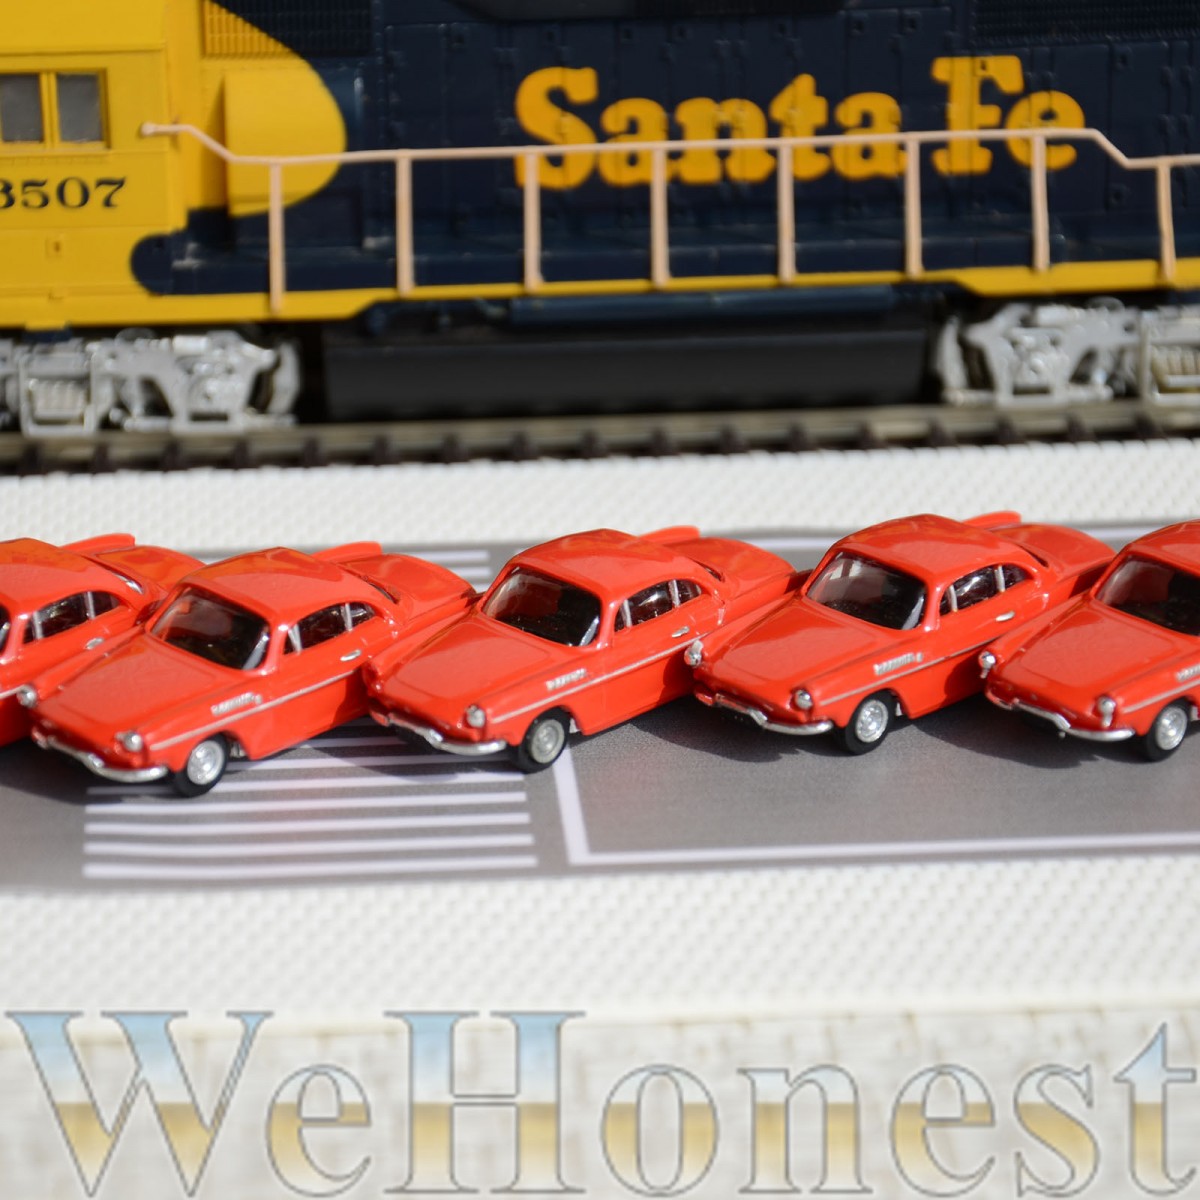 5 x Metal Model Cars 1:87 HO Scale for Building Railroad Train Scenery red